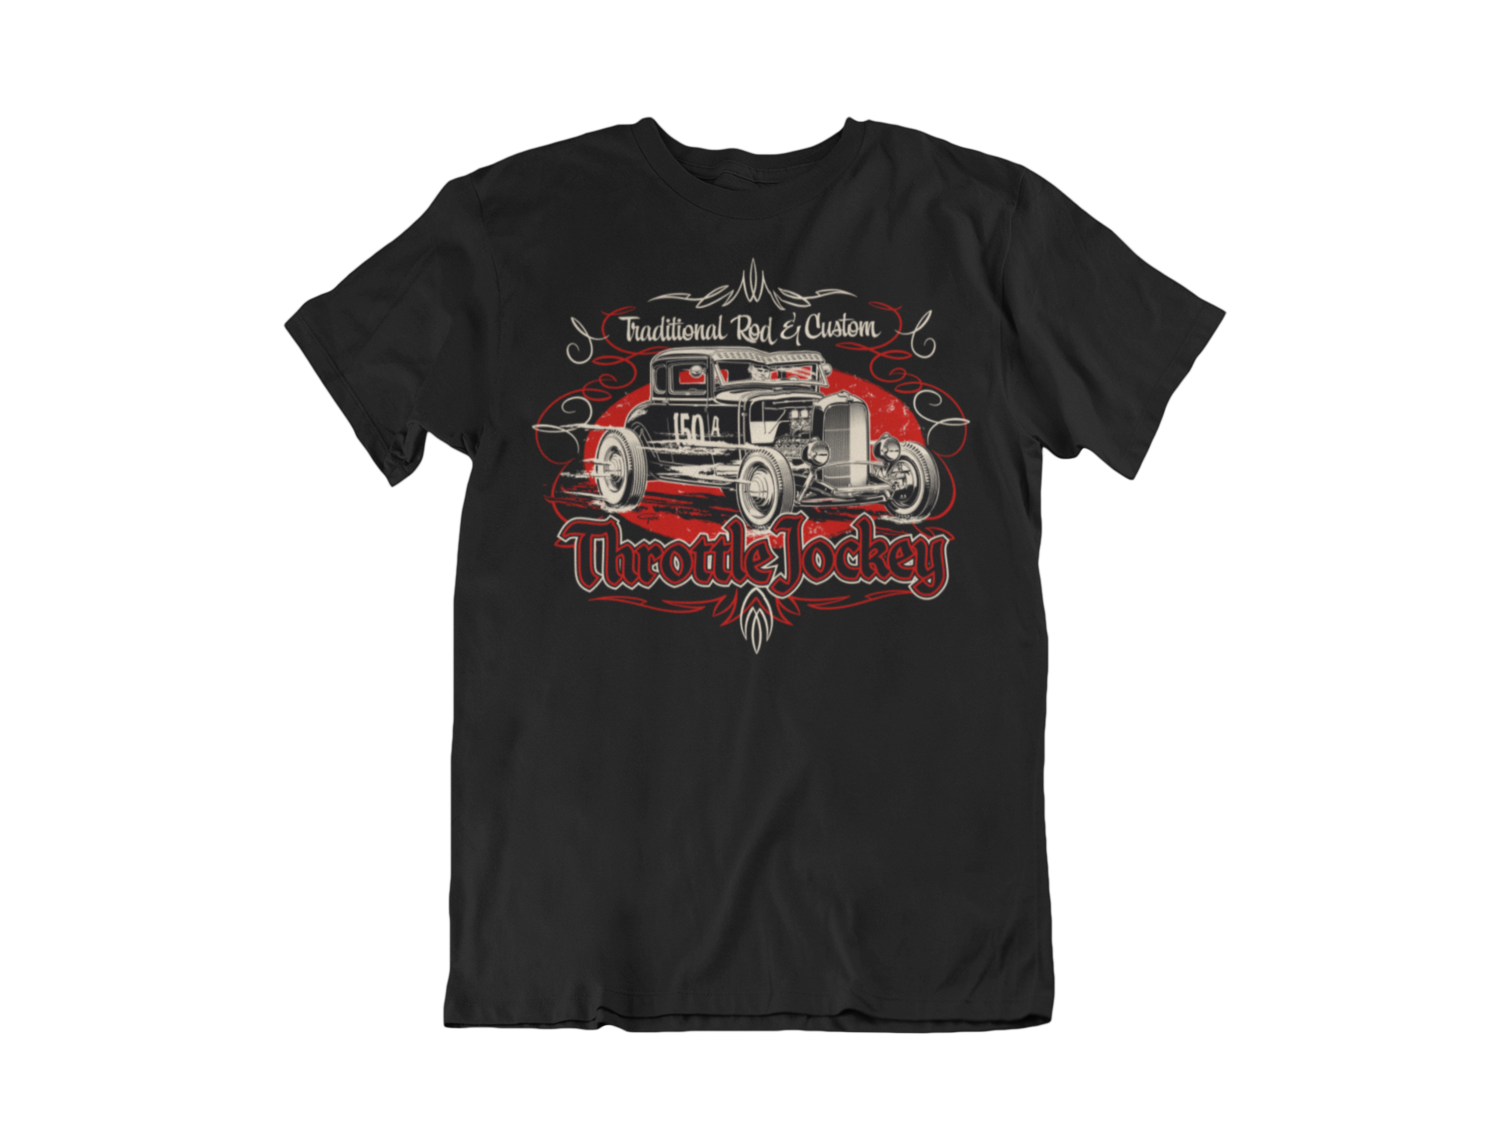 THROTTLE JOCKEY "Coupe" T-SHIRT MAN BY Ger "Dutch Courage" Peters artwork